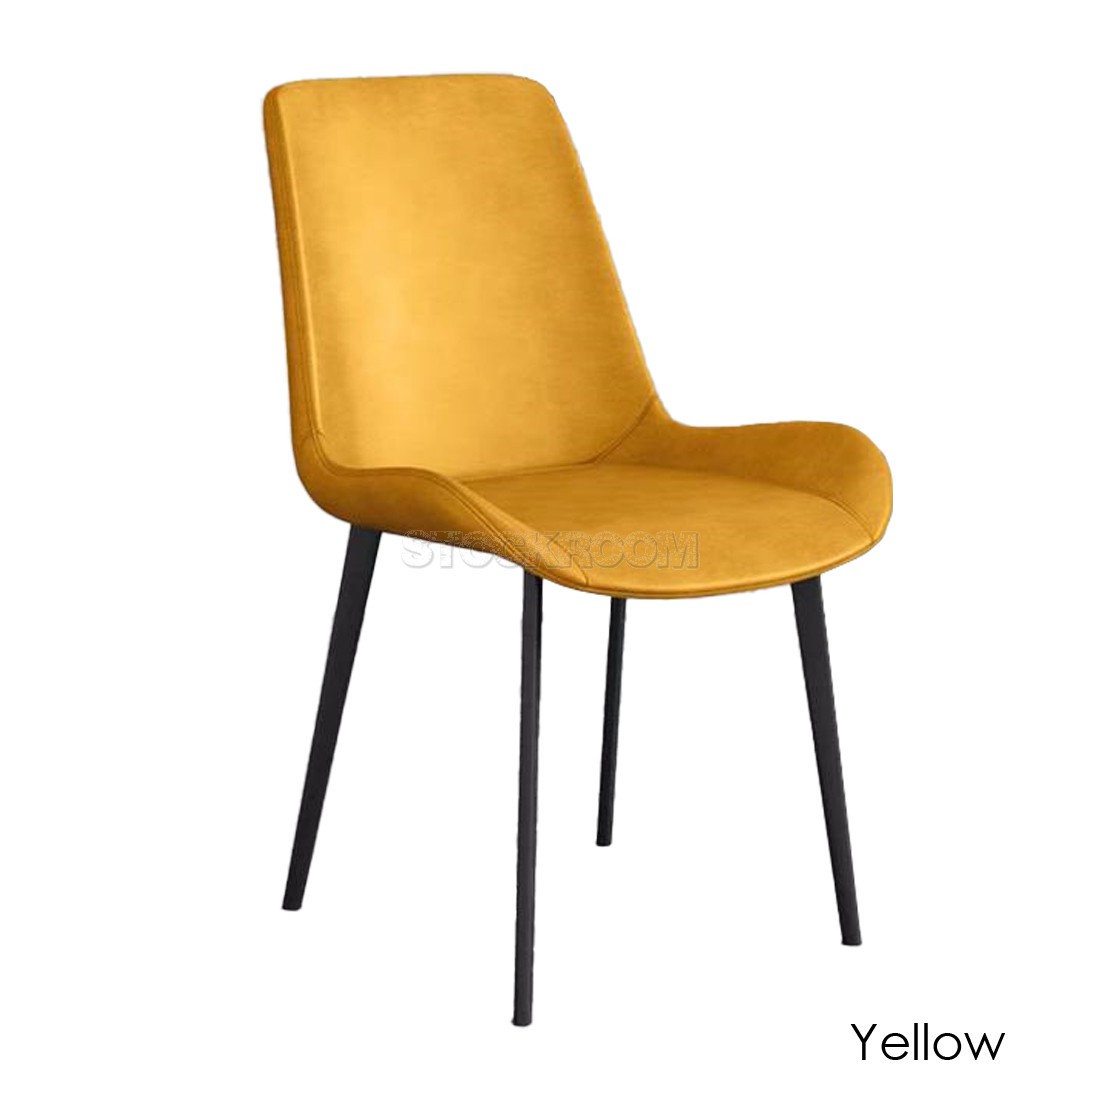 Beckett Upholstered Dining Chair With Metal Legs